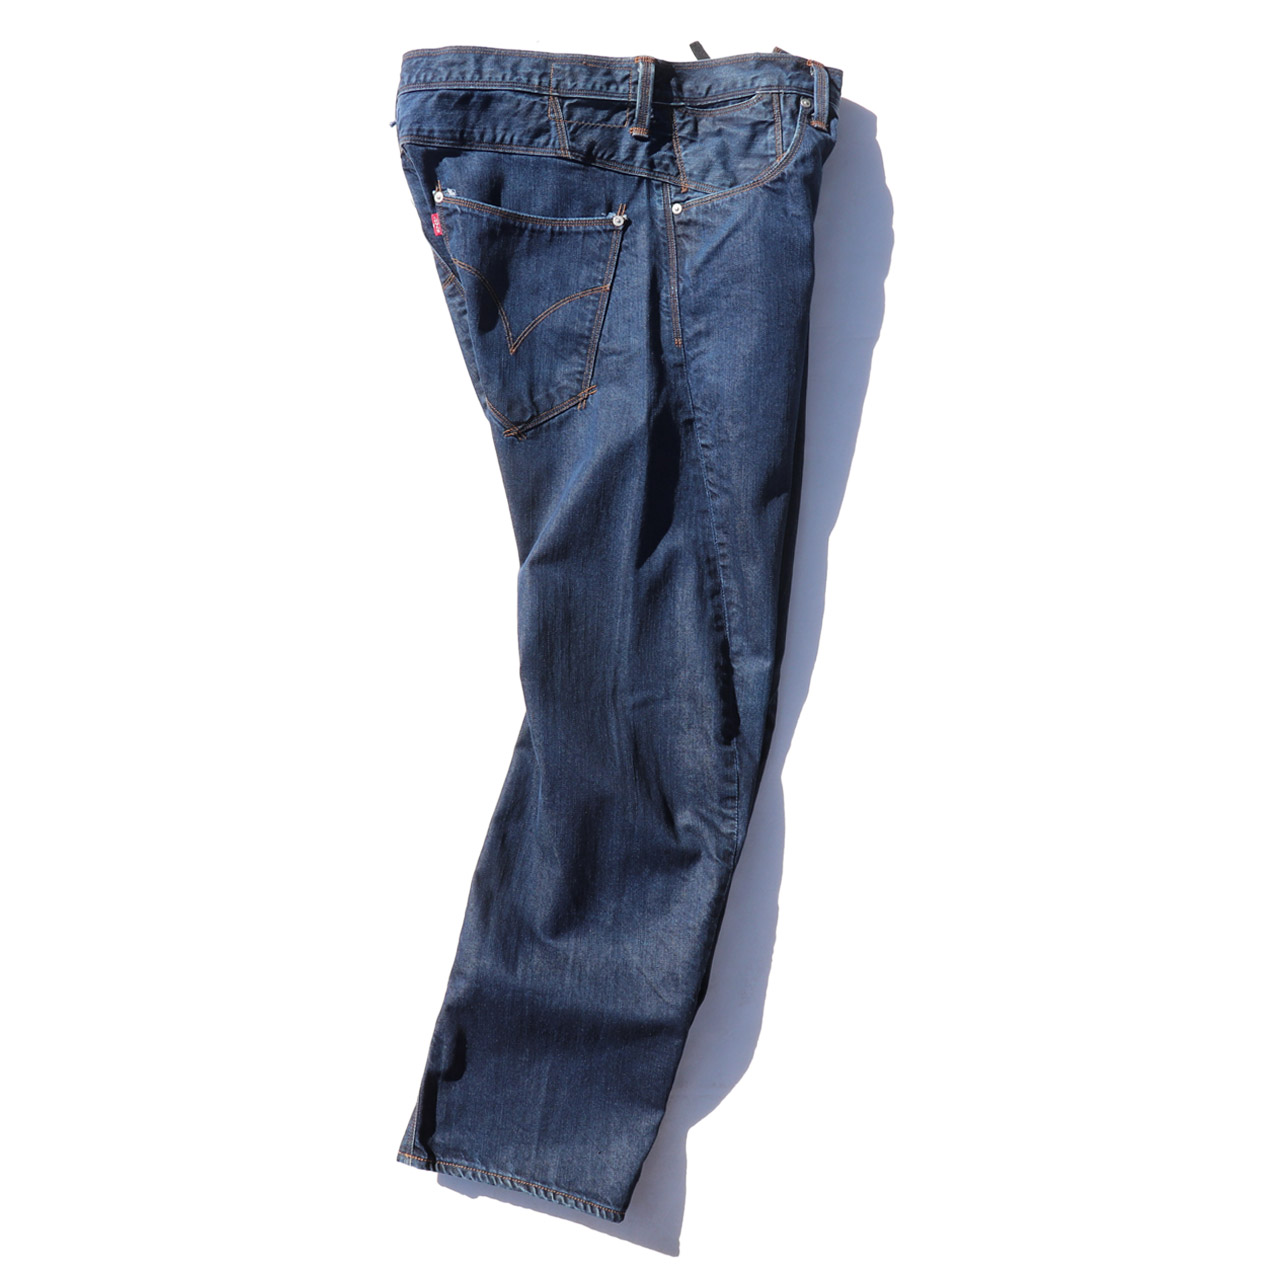 POST JUNK / 00's EURO LEVI'S ENGINEERED JEANS Denim Pants Made In ...